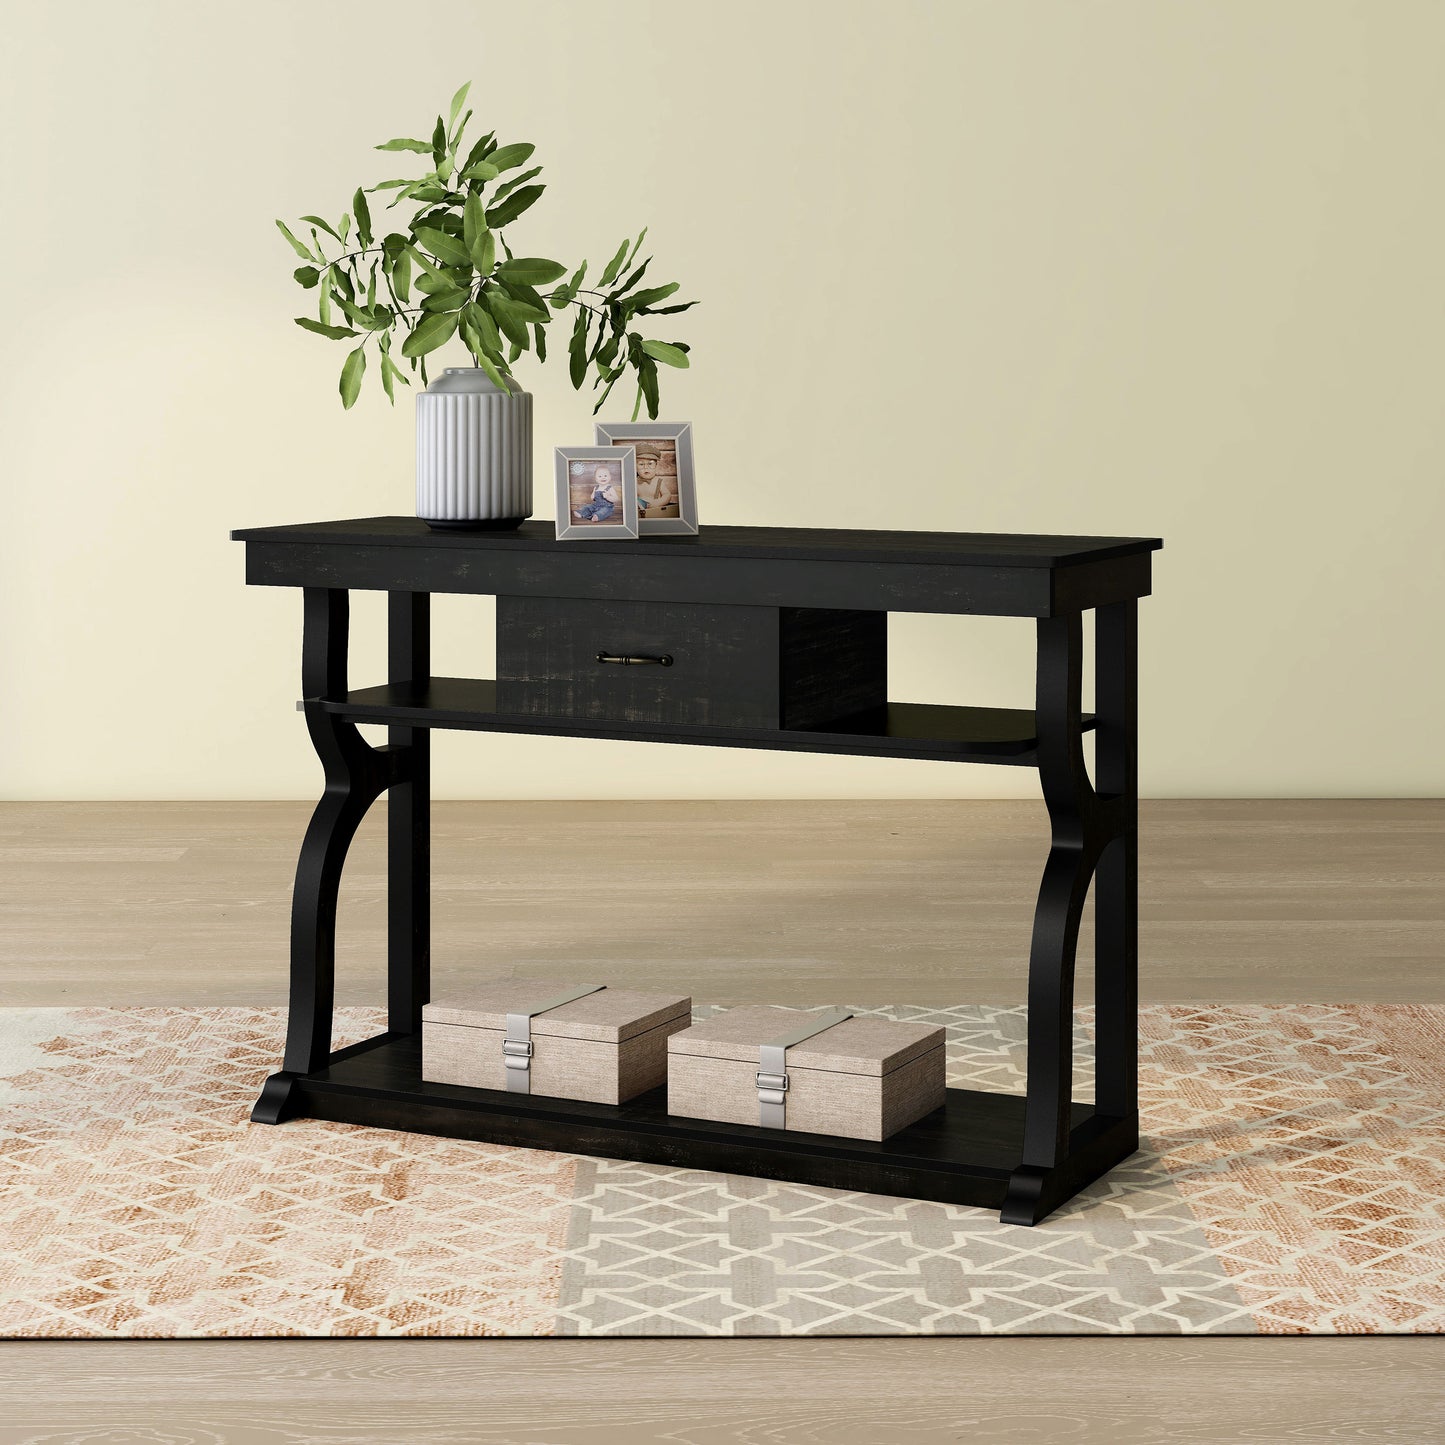 Left angled farmhouse reclaimed black oak three-shelf storage console table with a drawer on an area rug with accessories